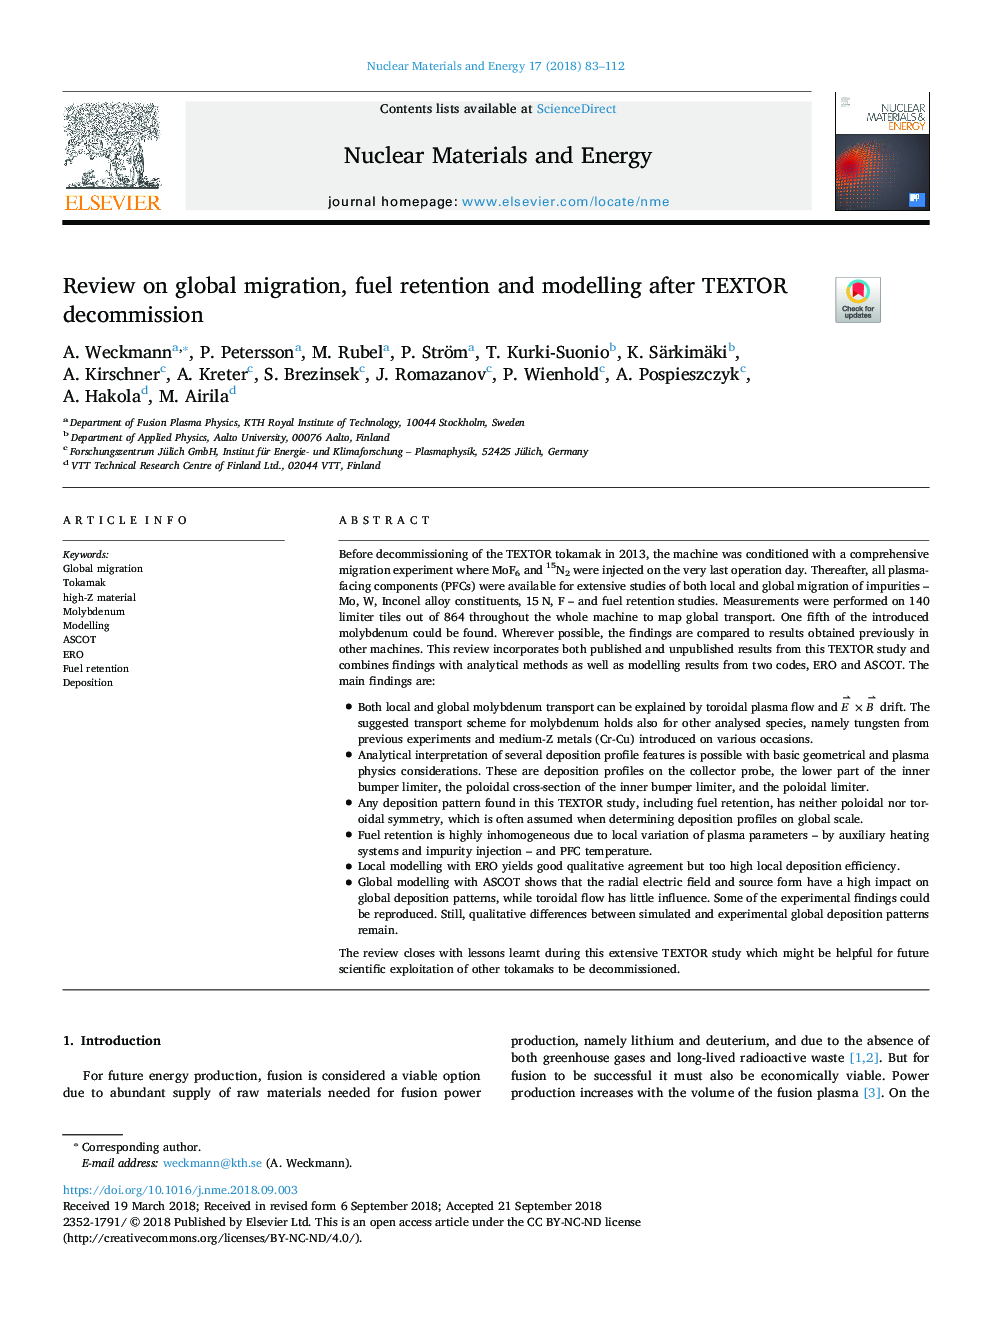 Review on global migration, fuel retention and modelling after TEXTOR decommission